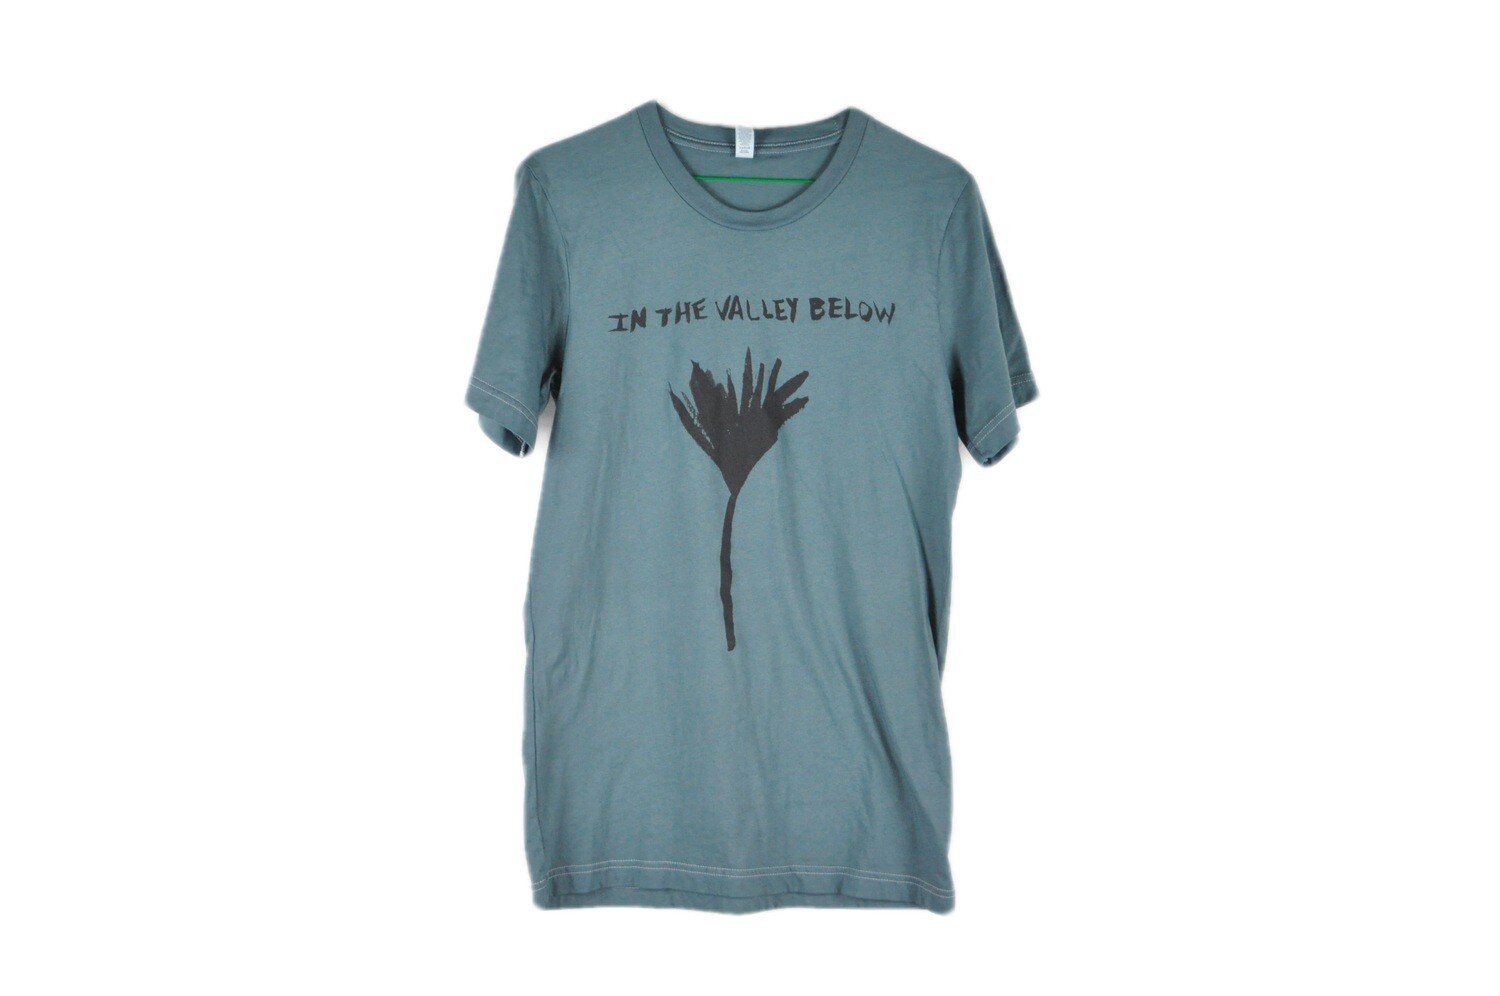 Sage Green Logo T-Shirt (only Small left) - SALE